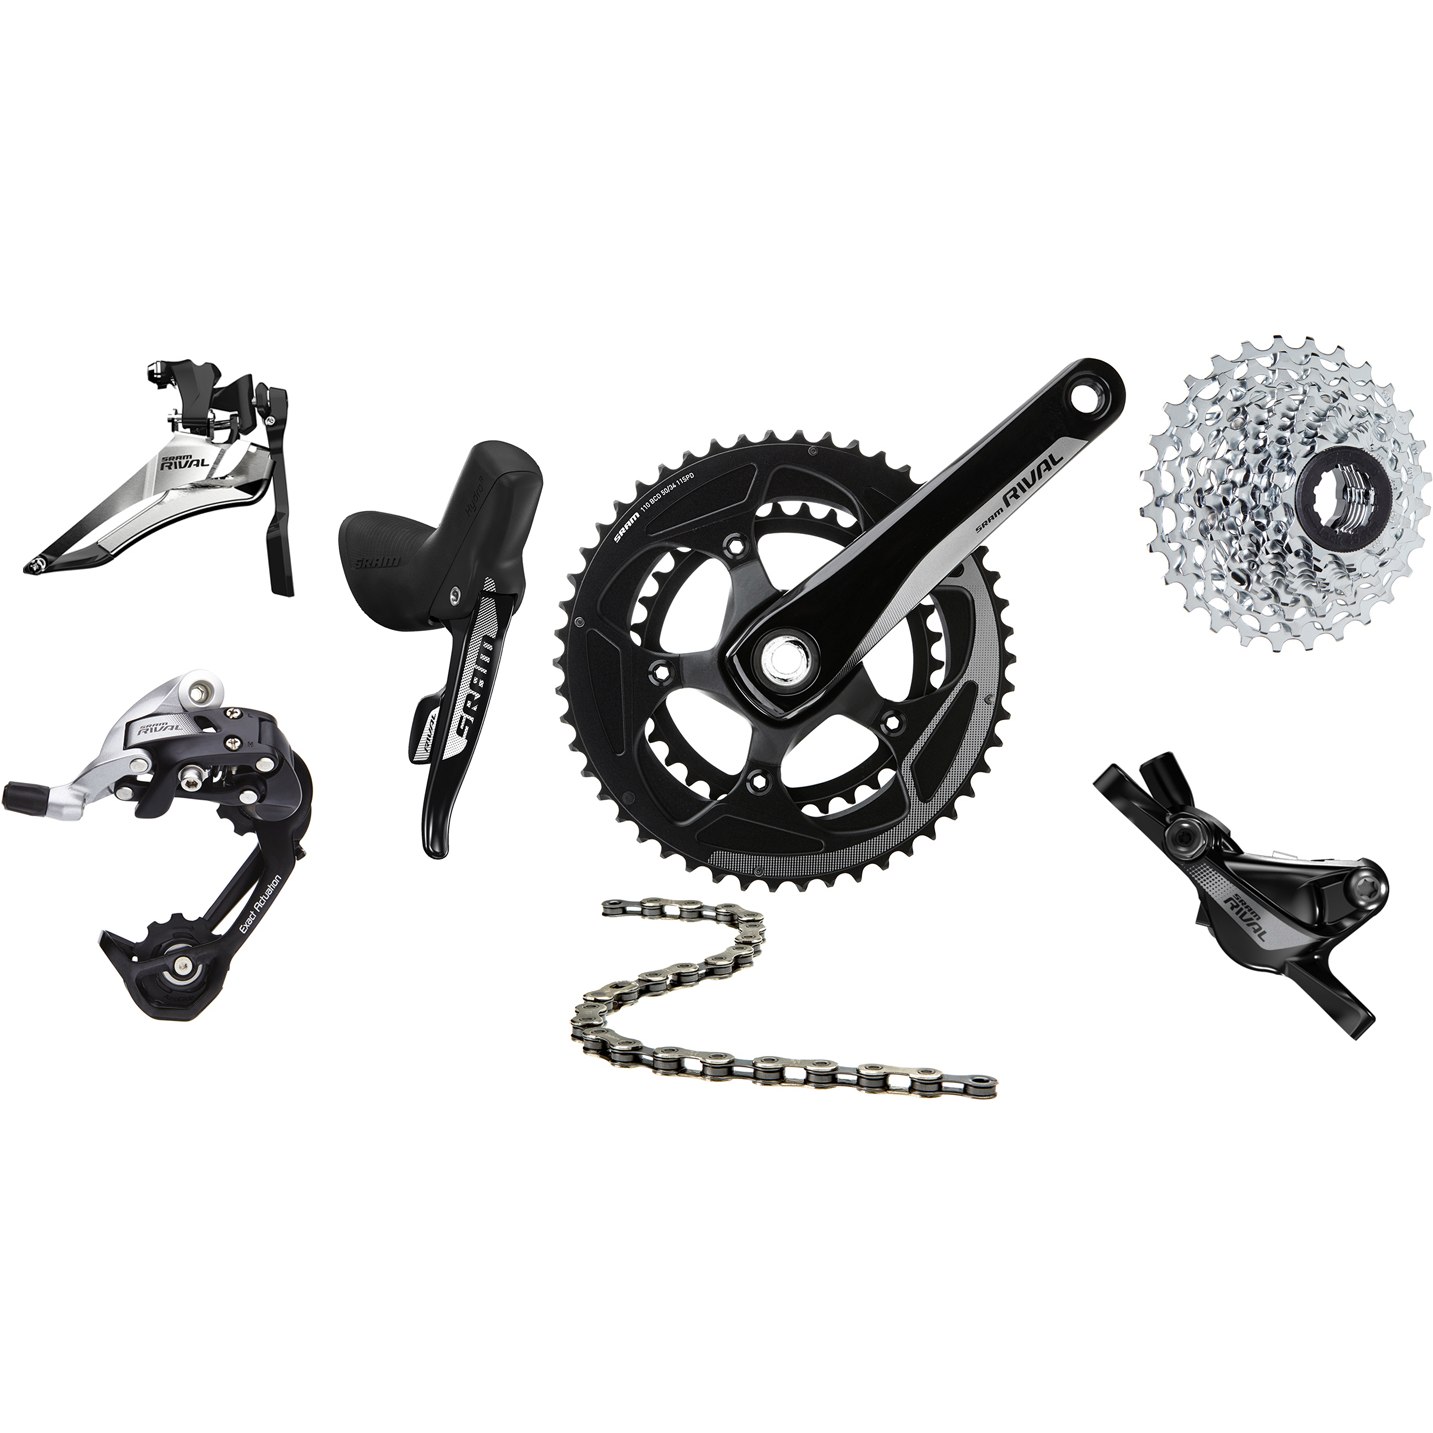 Picture of SRAM Rival 22 Groupset 2x11 compact - GXP - with hydraulic Disc Brakes